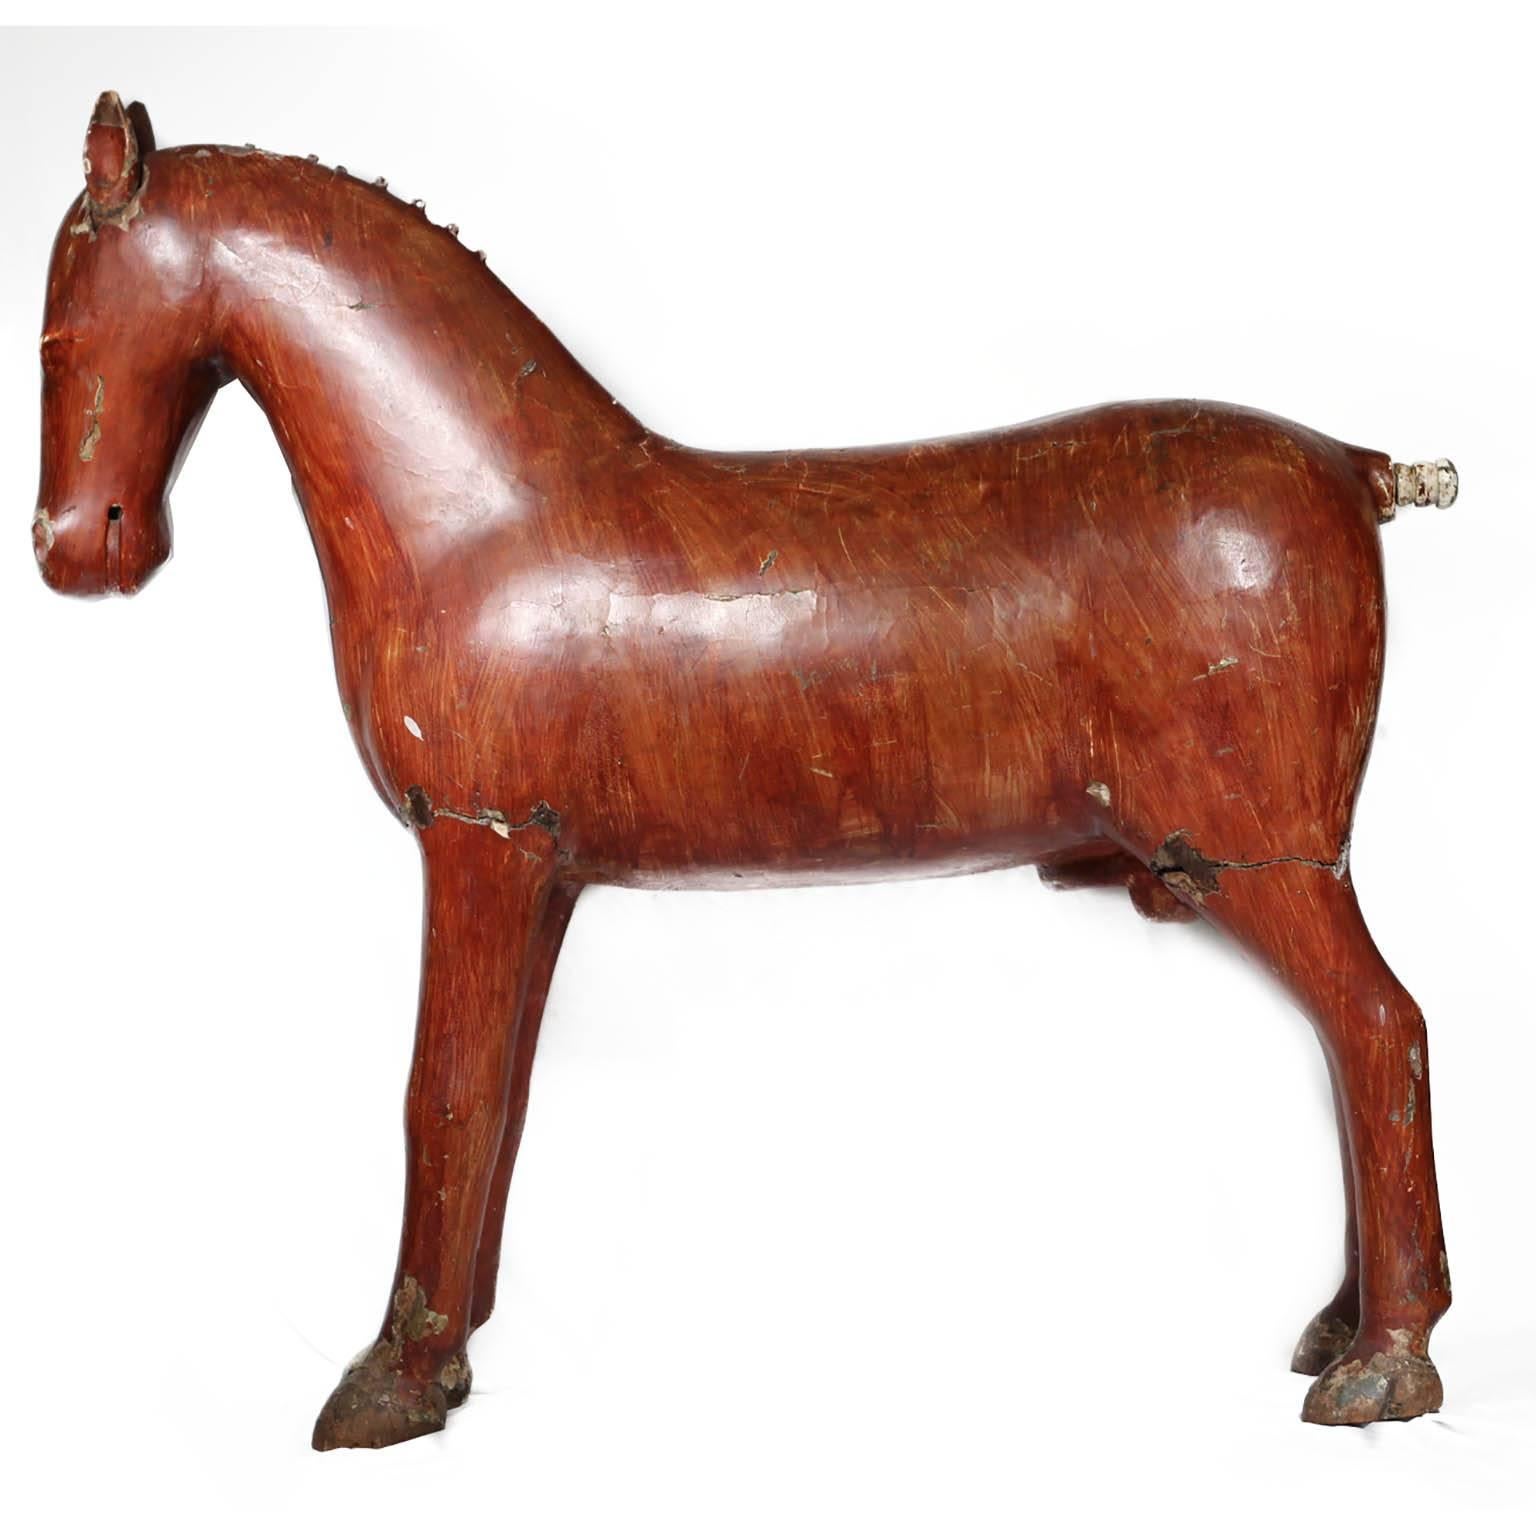 Victorian 19th Century Distressed Painted Wooden Figure of a Horse